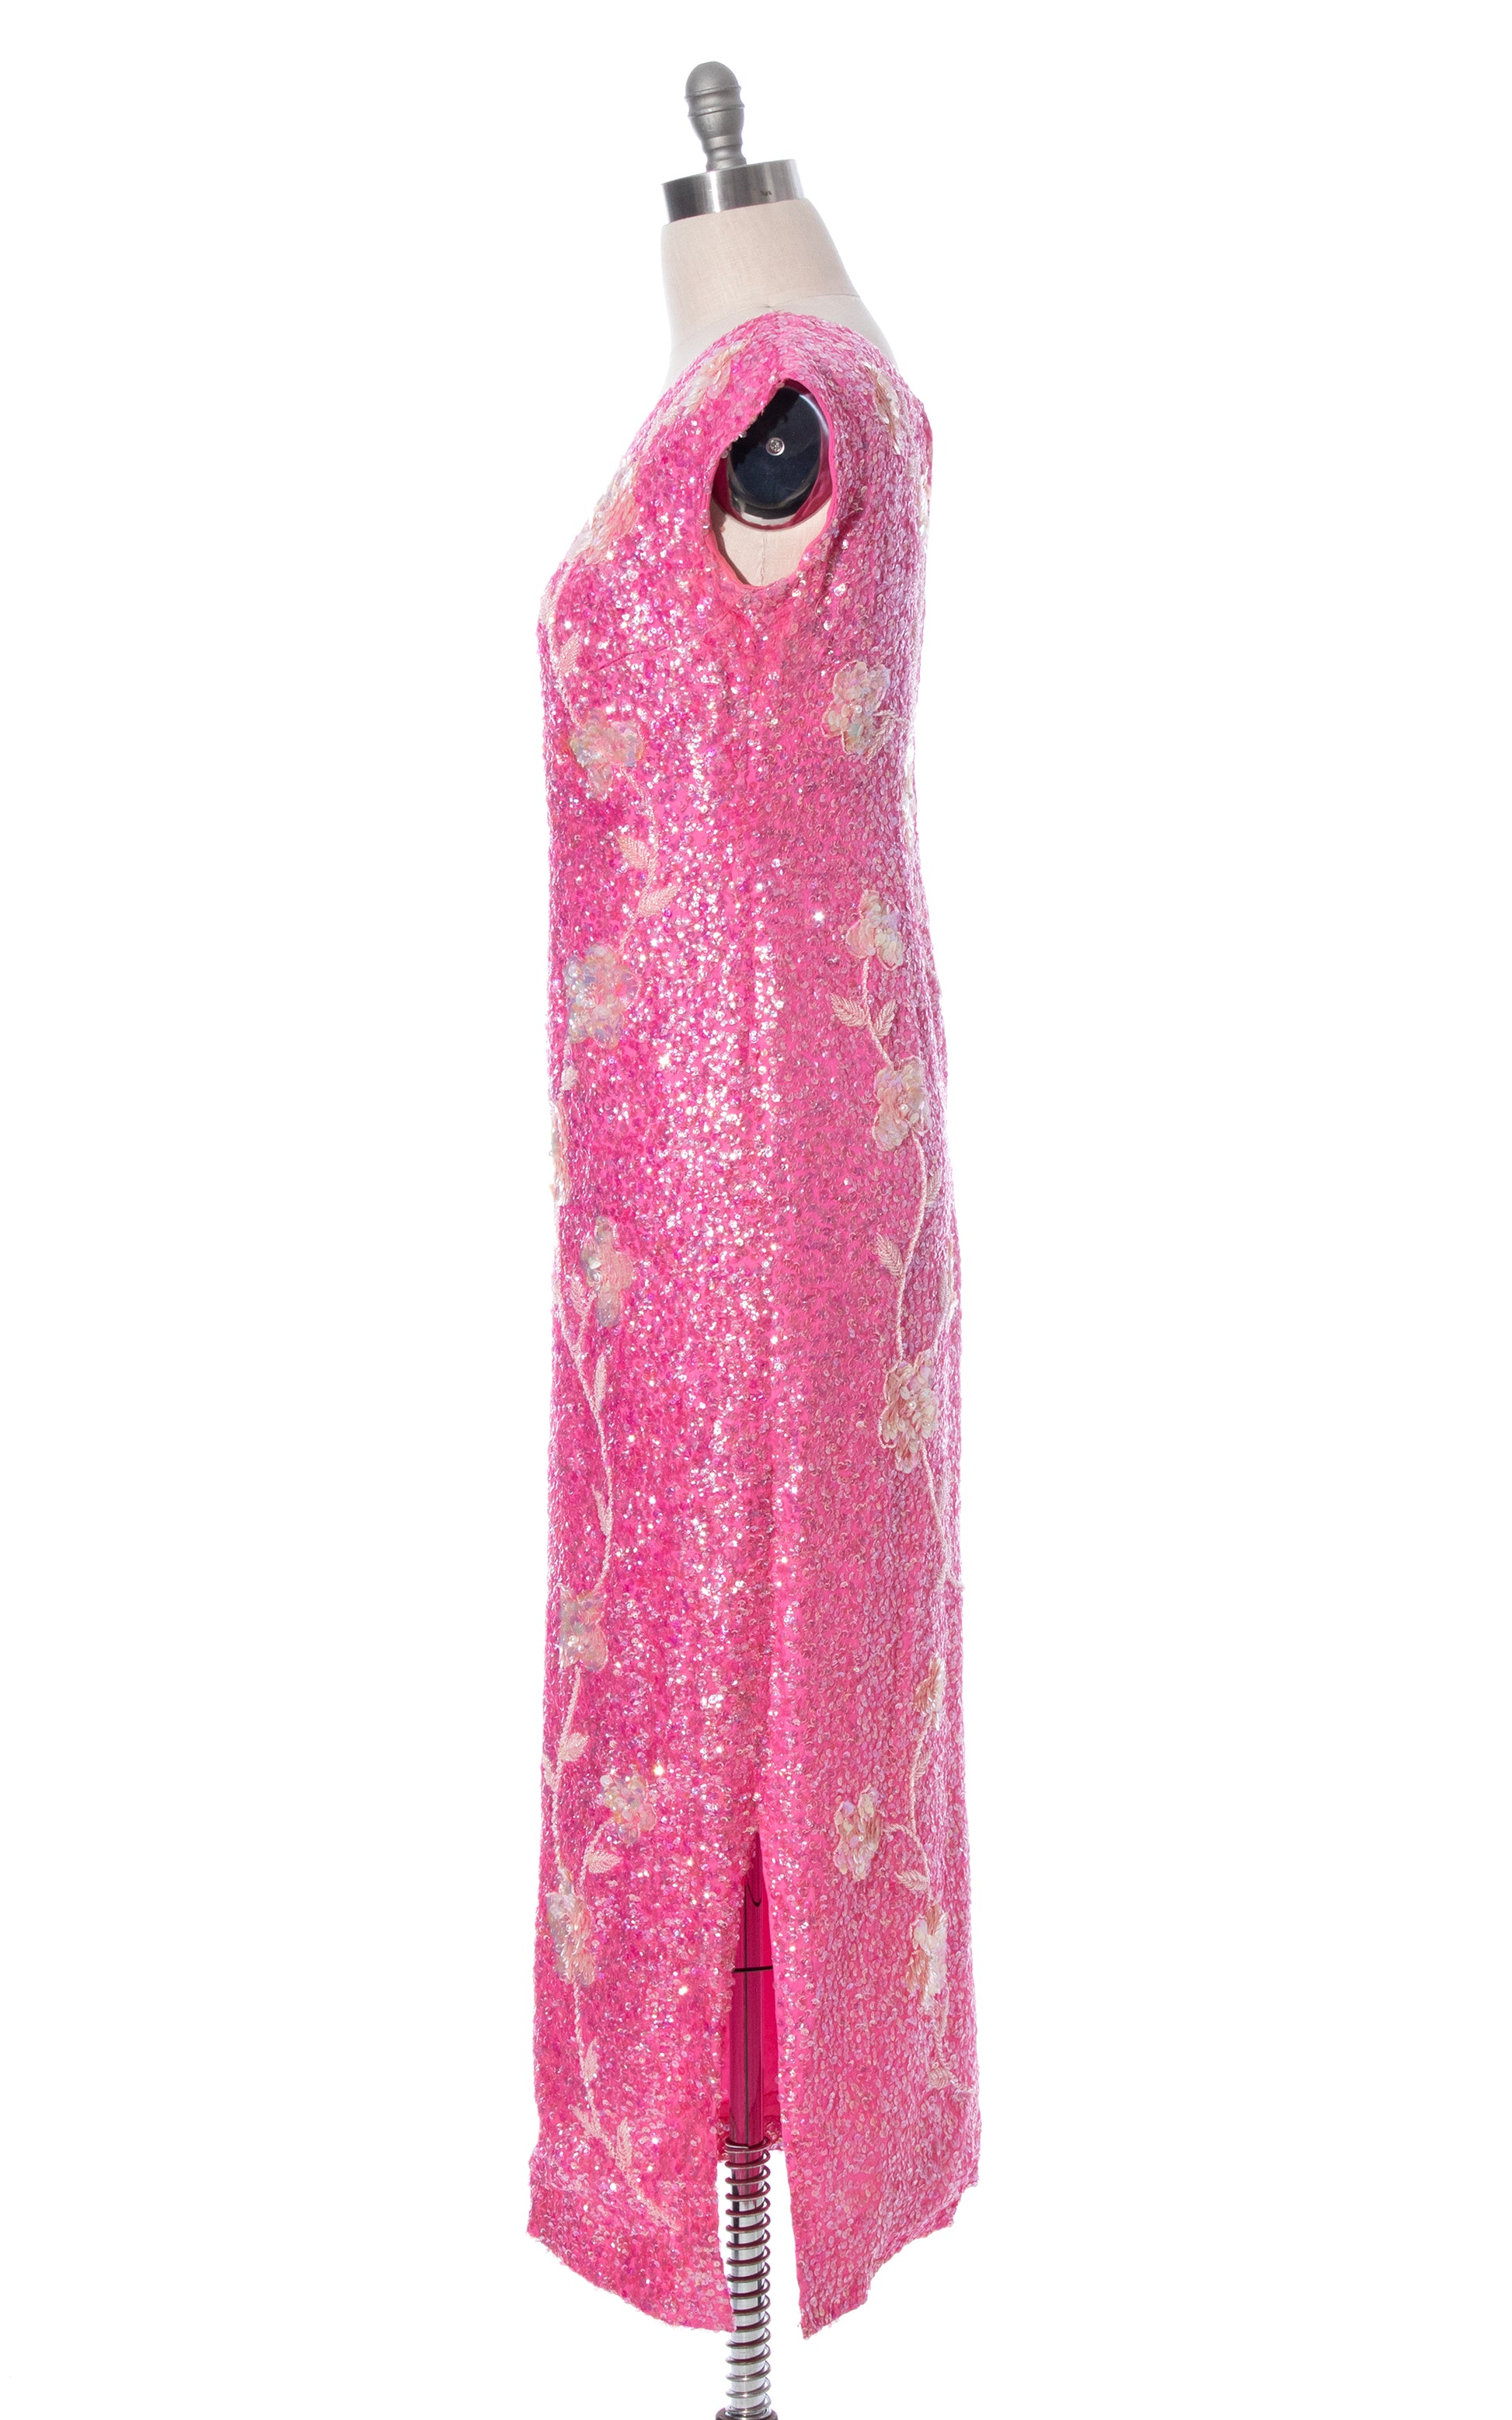 Vintage 1960s 60s Hot Pink Floral Sequined Full Length Evening Gown Party Dress volup plus size BirthdayLifeVintage